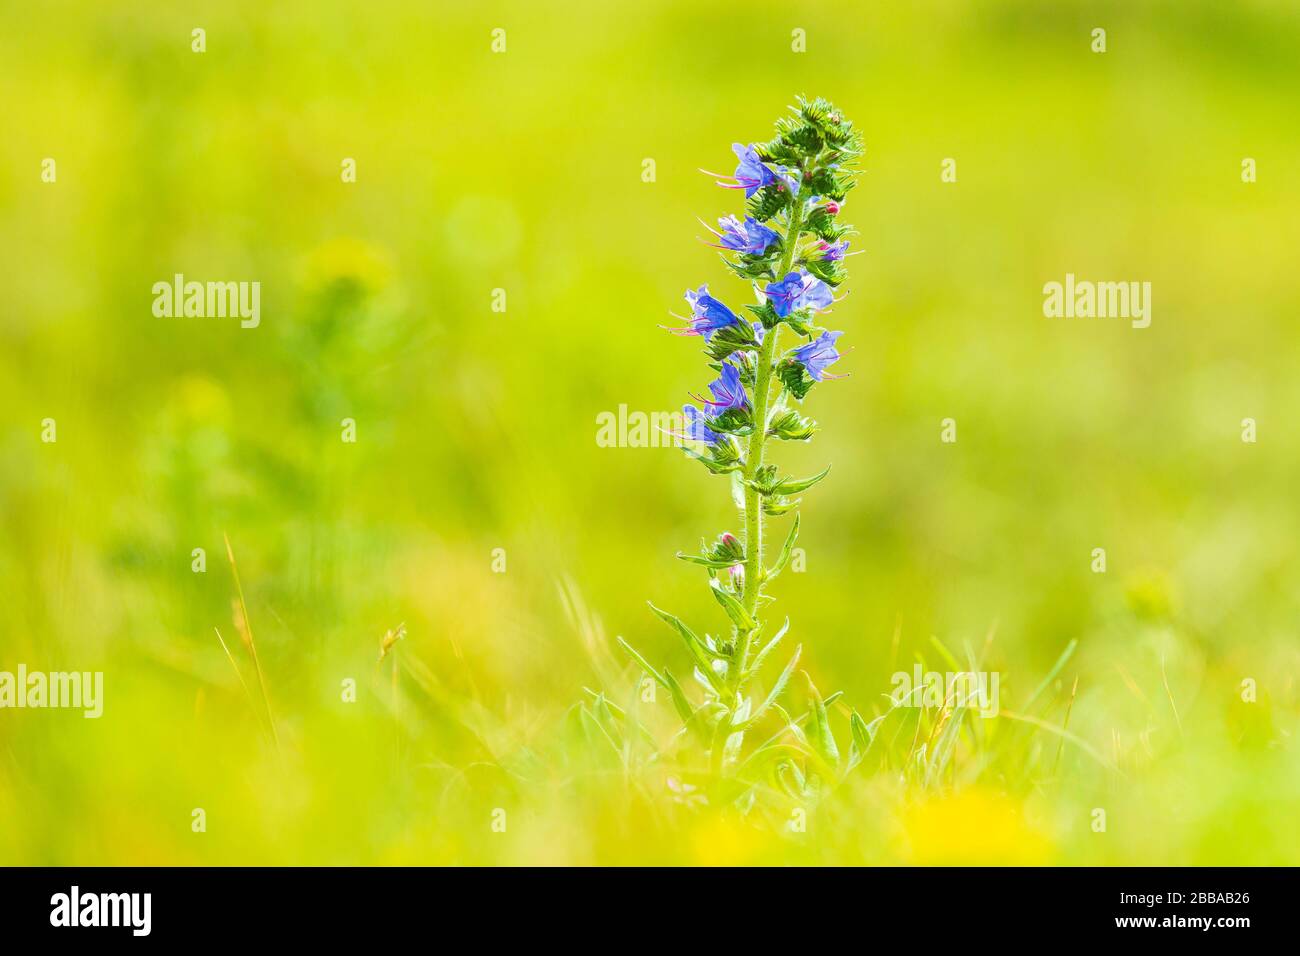 Blueweed or viper's bugloss, Echium vulgare, flowers blooming in a meadow. Selective focus and natural daylight Stock Photo